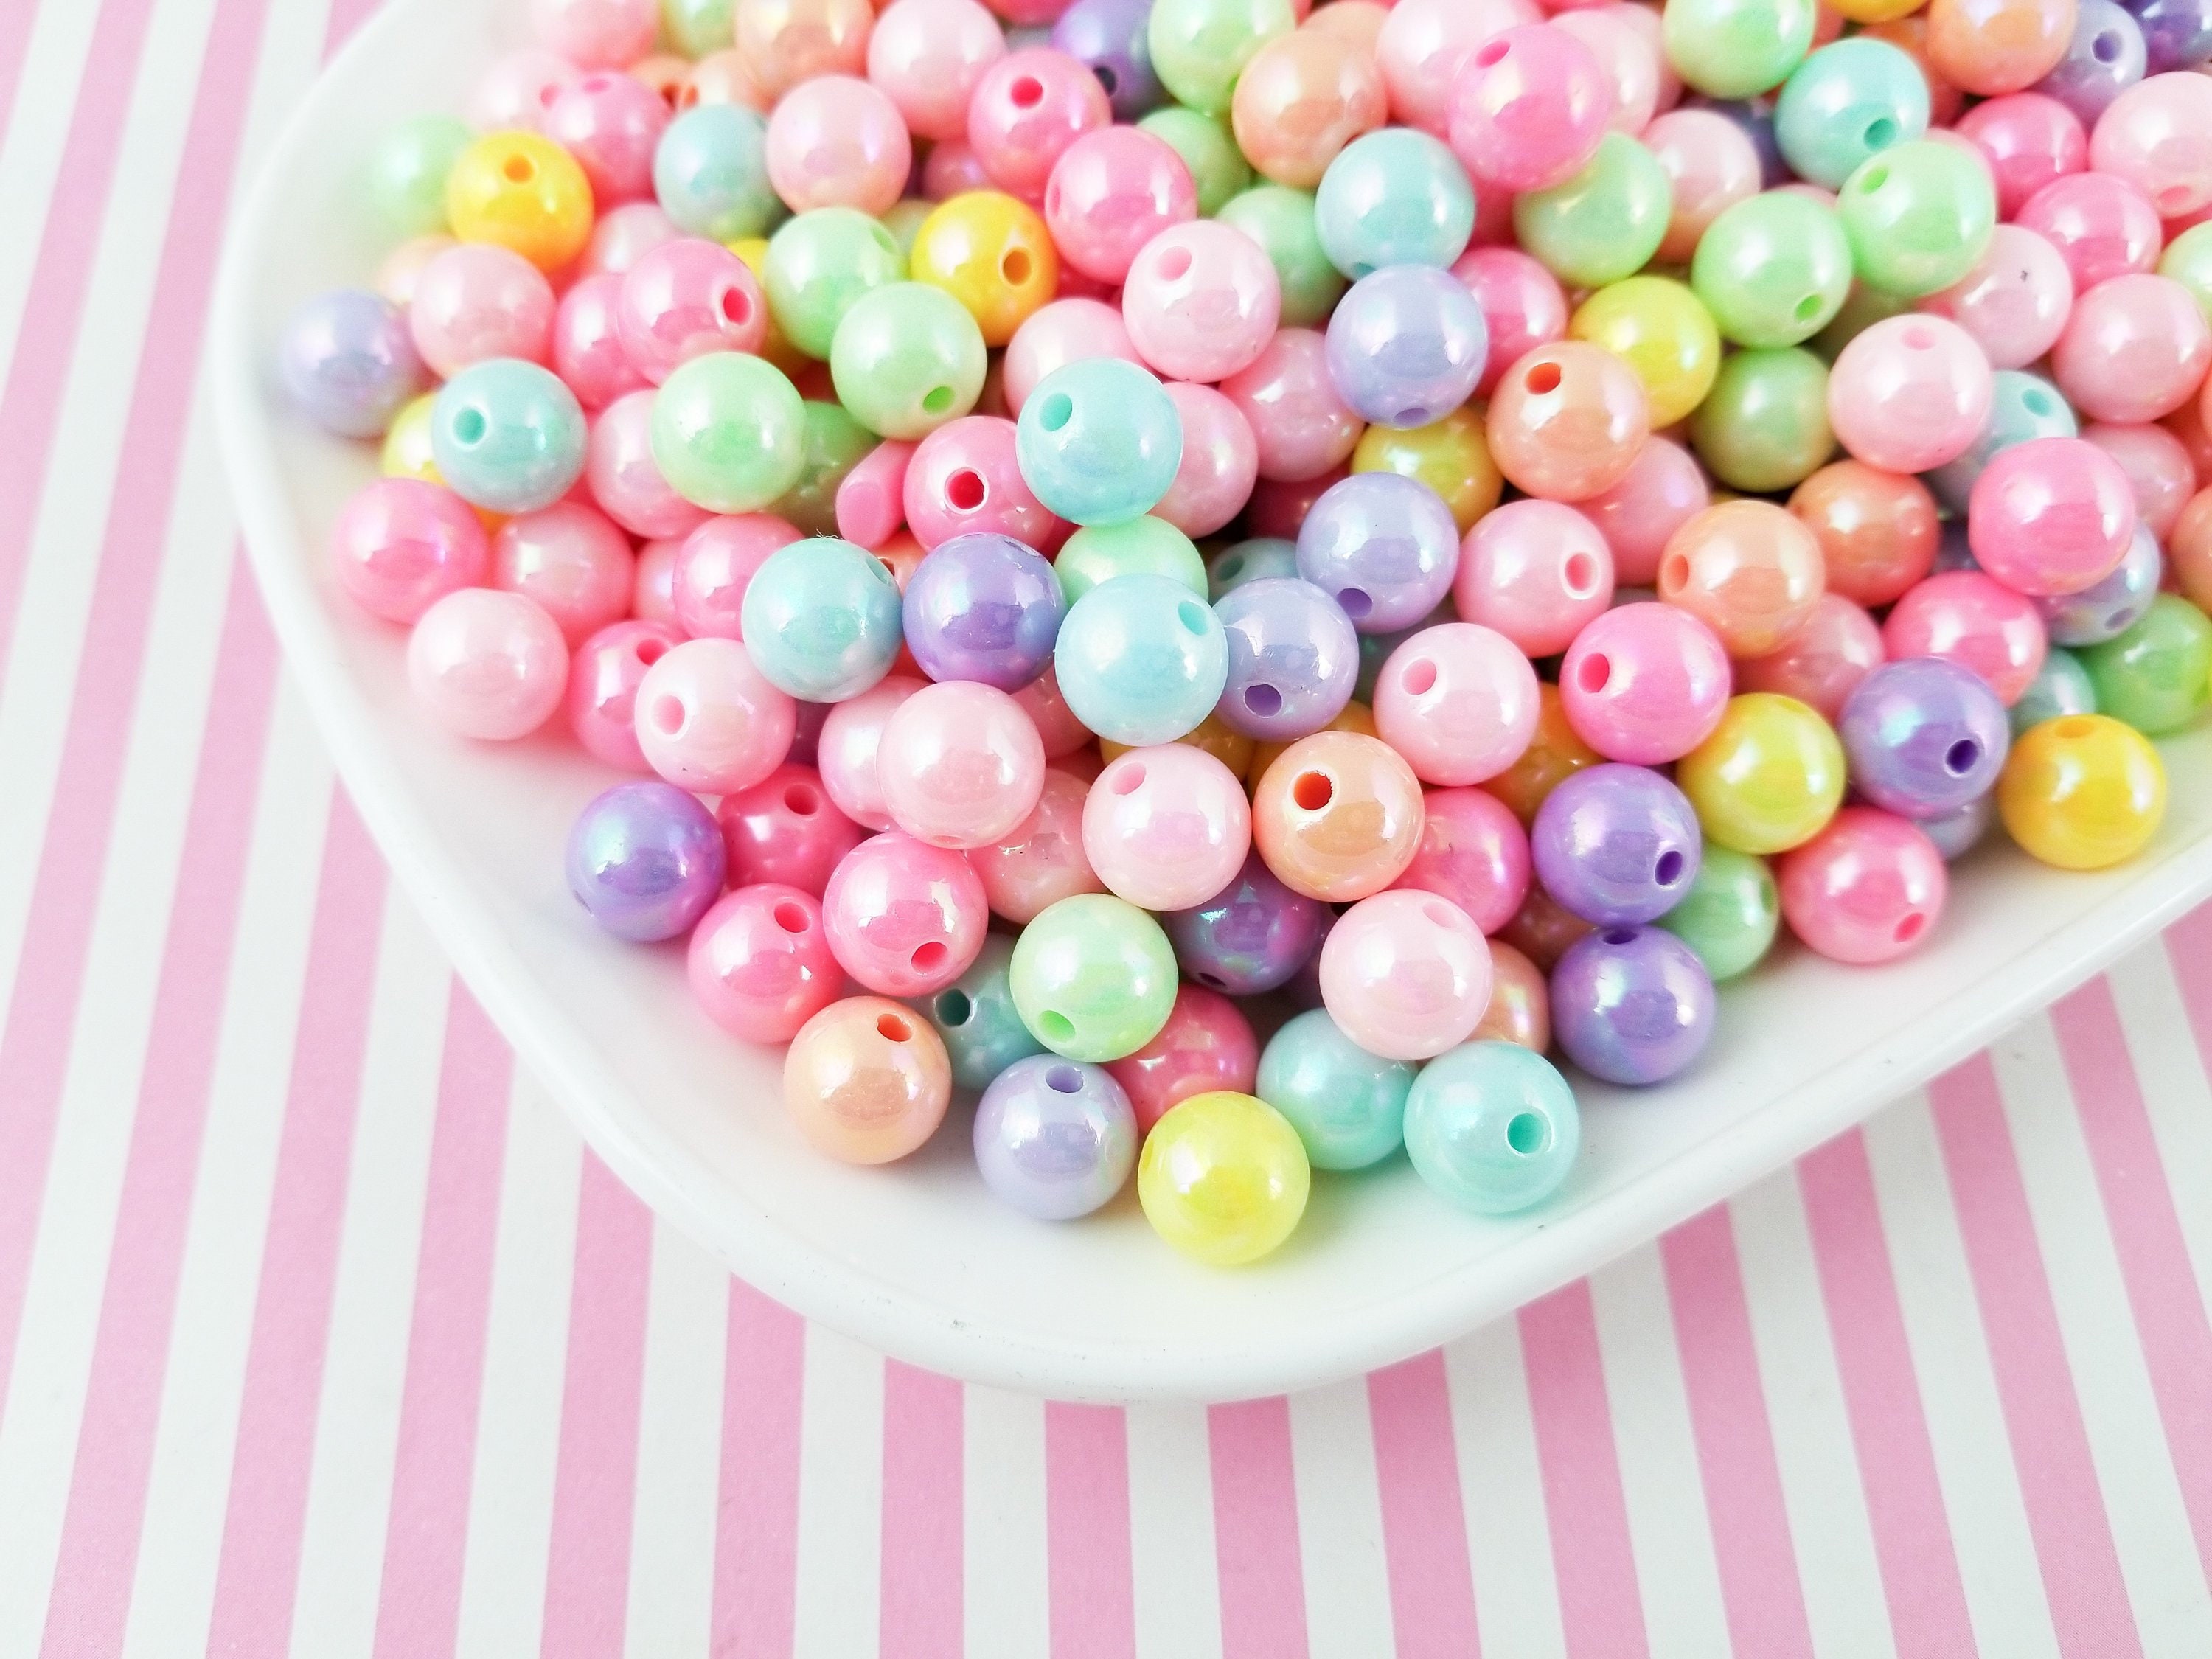 Colored Foam Fake Sprinkles, Colorful Fake Sprinkles, Mini Rainbow Foam  Ball Beads for Slime, Faux Nonpareils, Miniature Bubblegum Candy